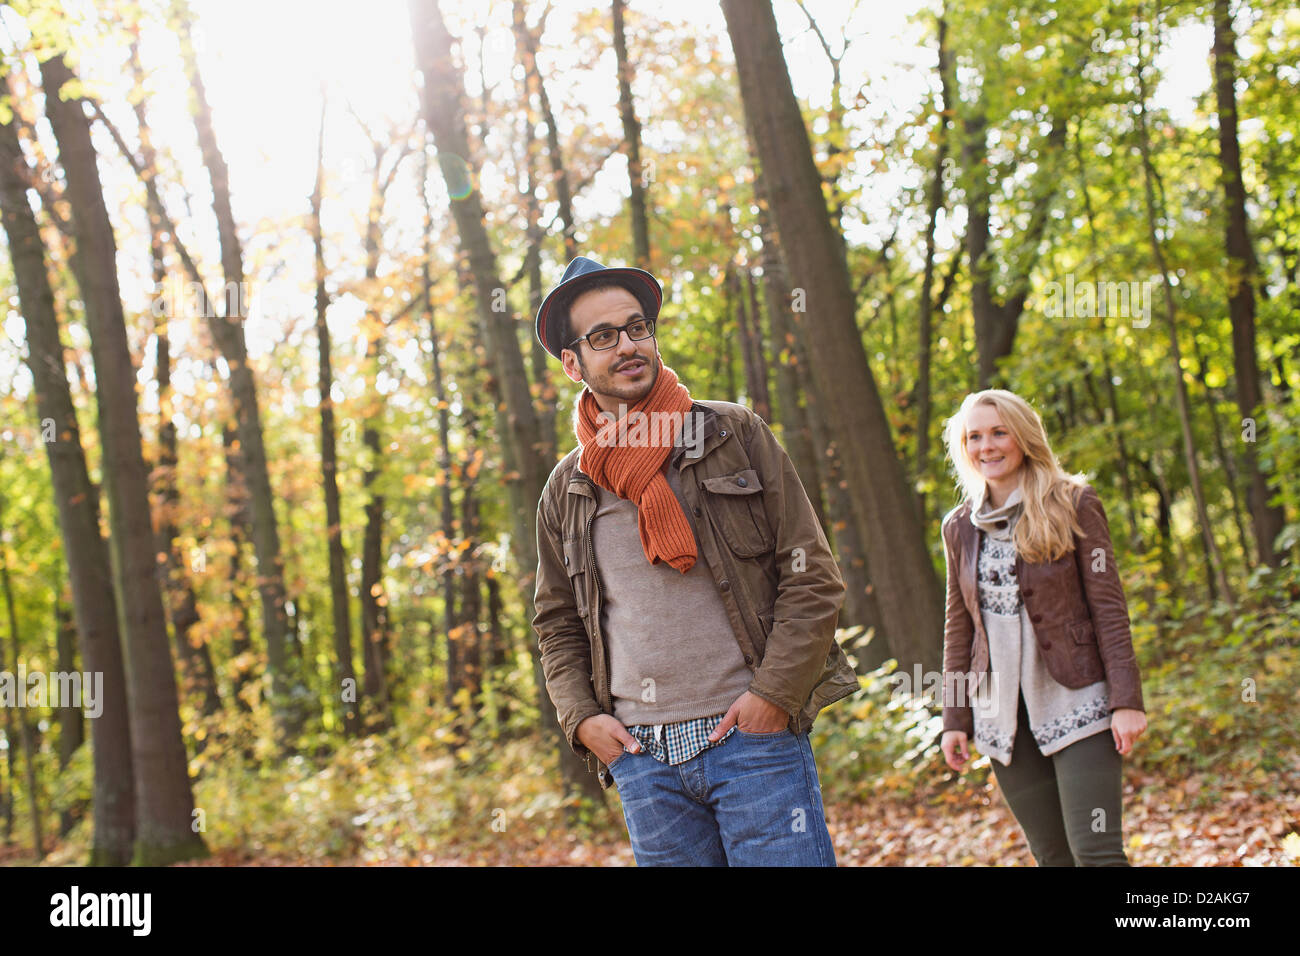 Smiling couple standing in forest Stock Photo